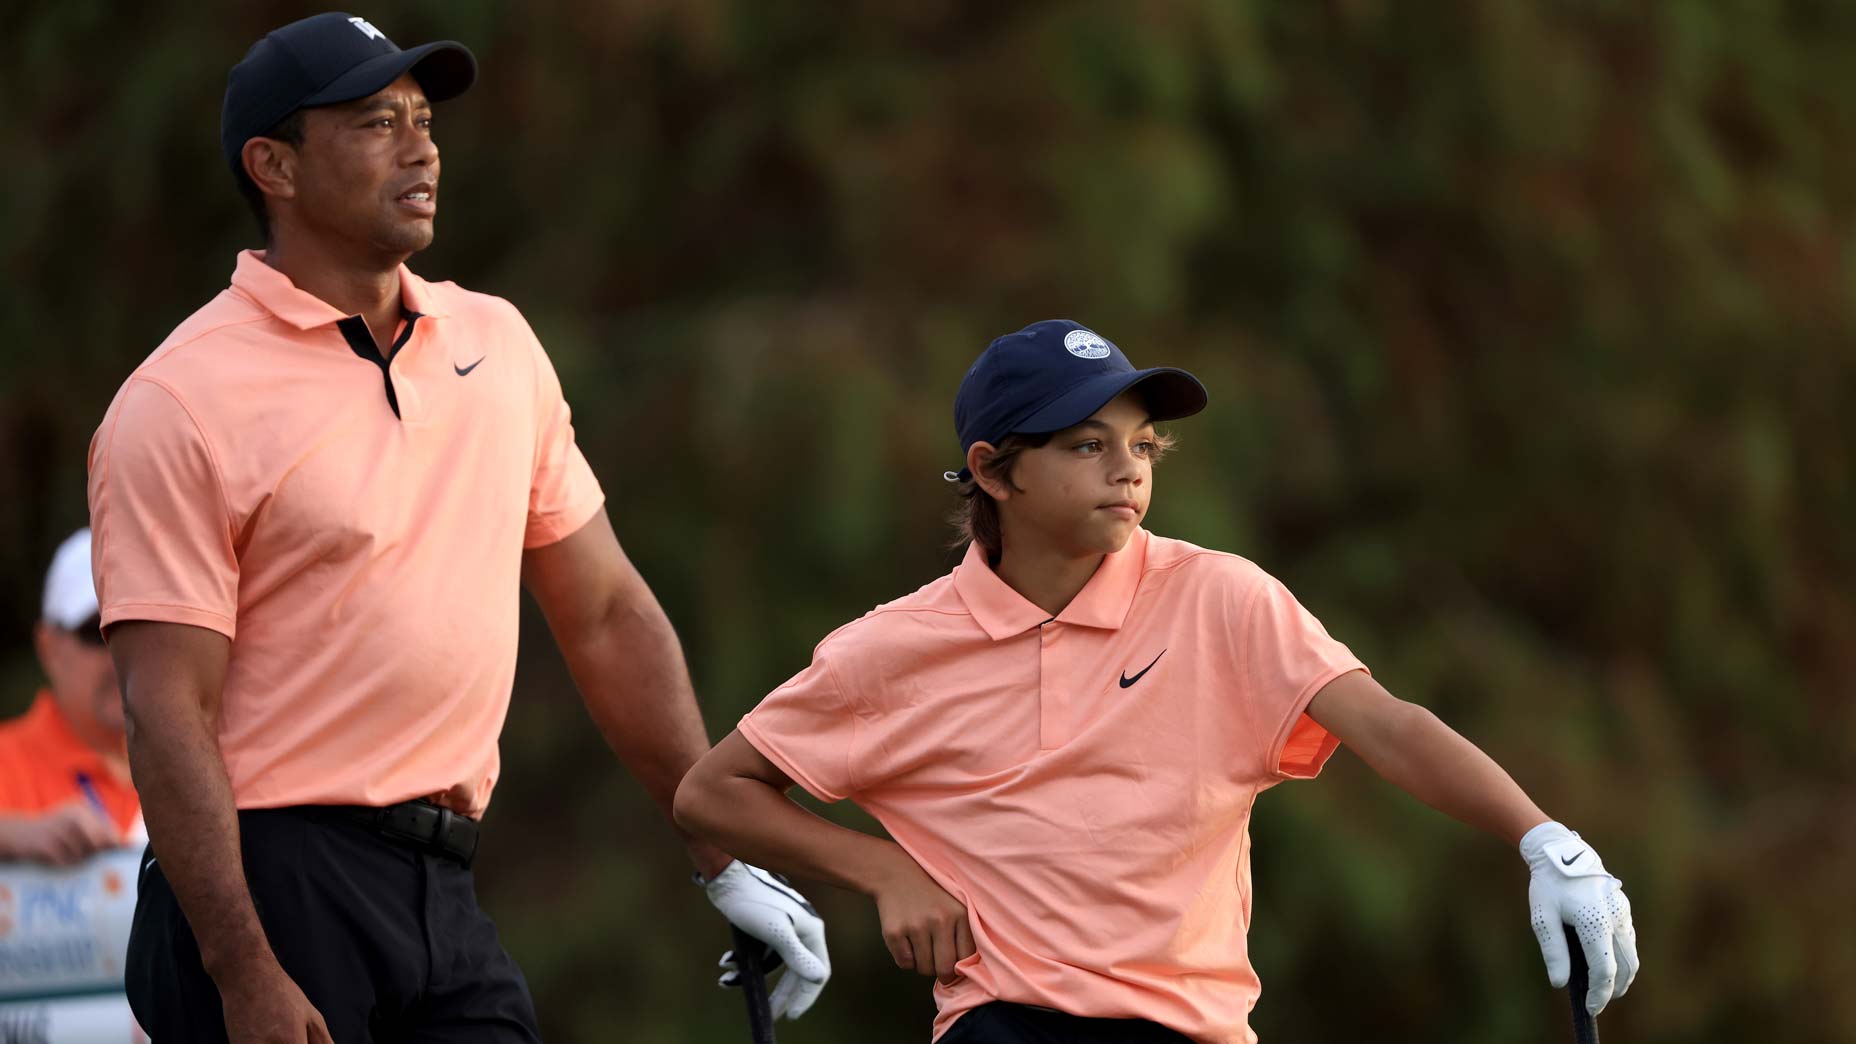 2022 PNC tee times When Tiger Woods tees off in Fridays Pro-Am